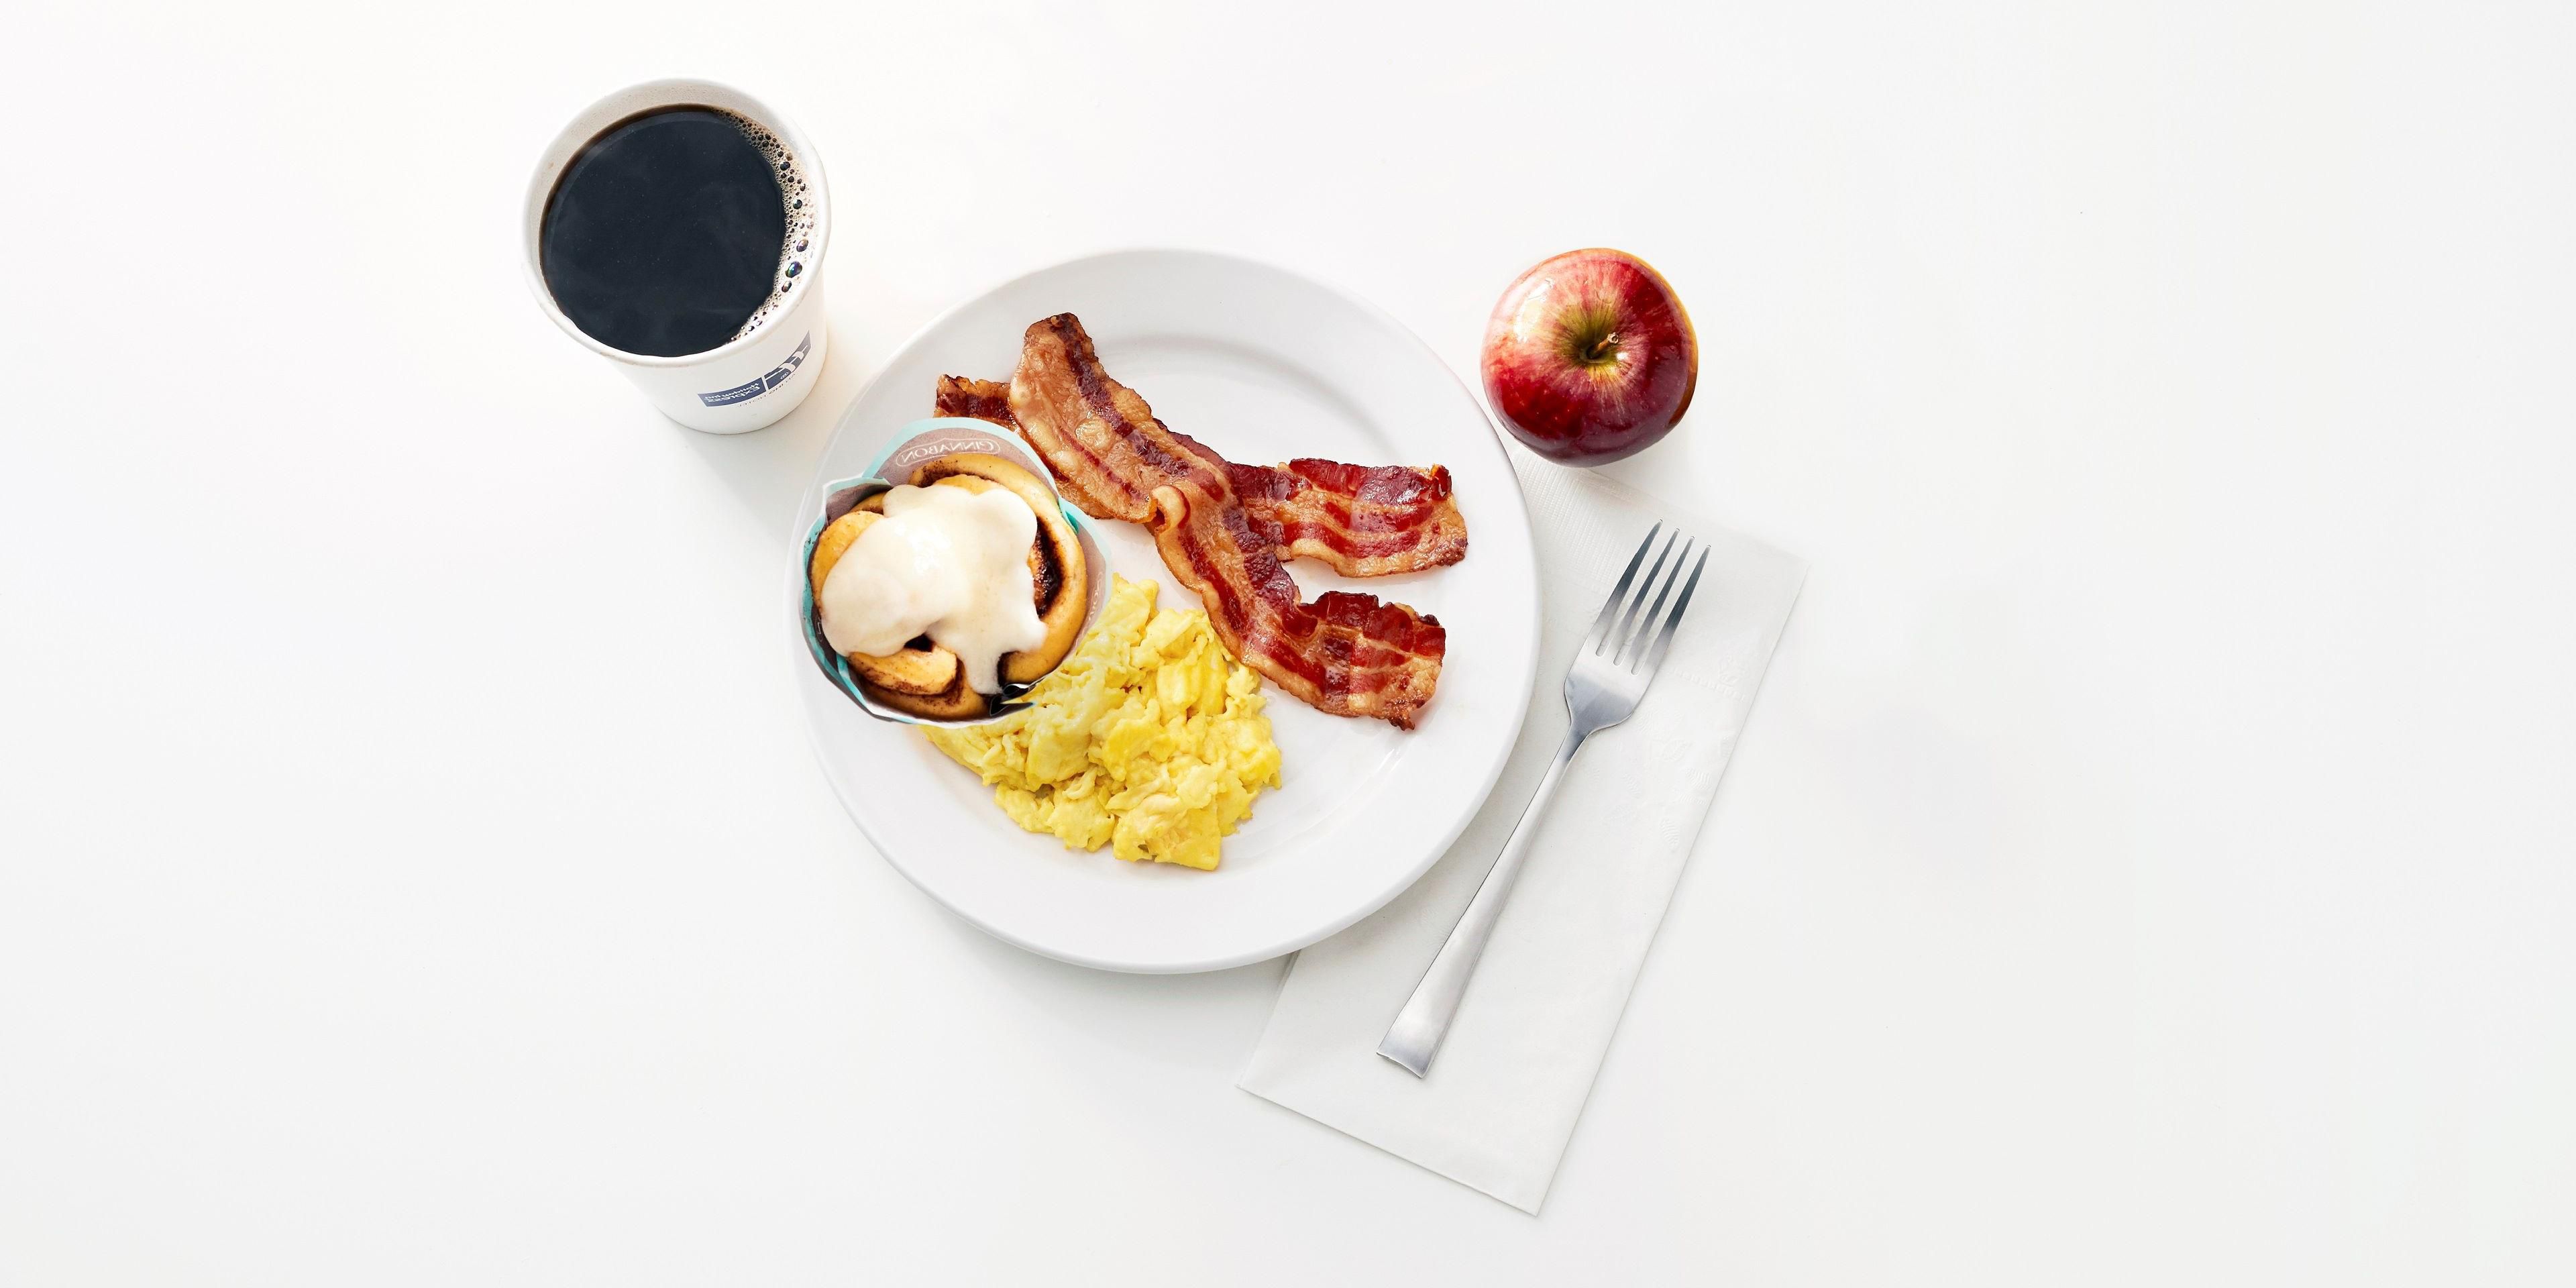 Kick start your day with our free Express Start Breakfast, with grab ‘n’ go options and favorites such as eggs and bacon, hot pancakes, our signature cinnamon rolls and fresh coffee. Offered from 6:30AM to 9:30AM.